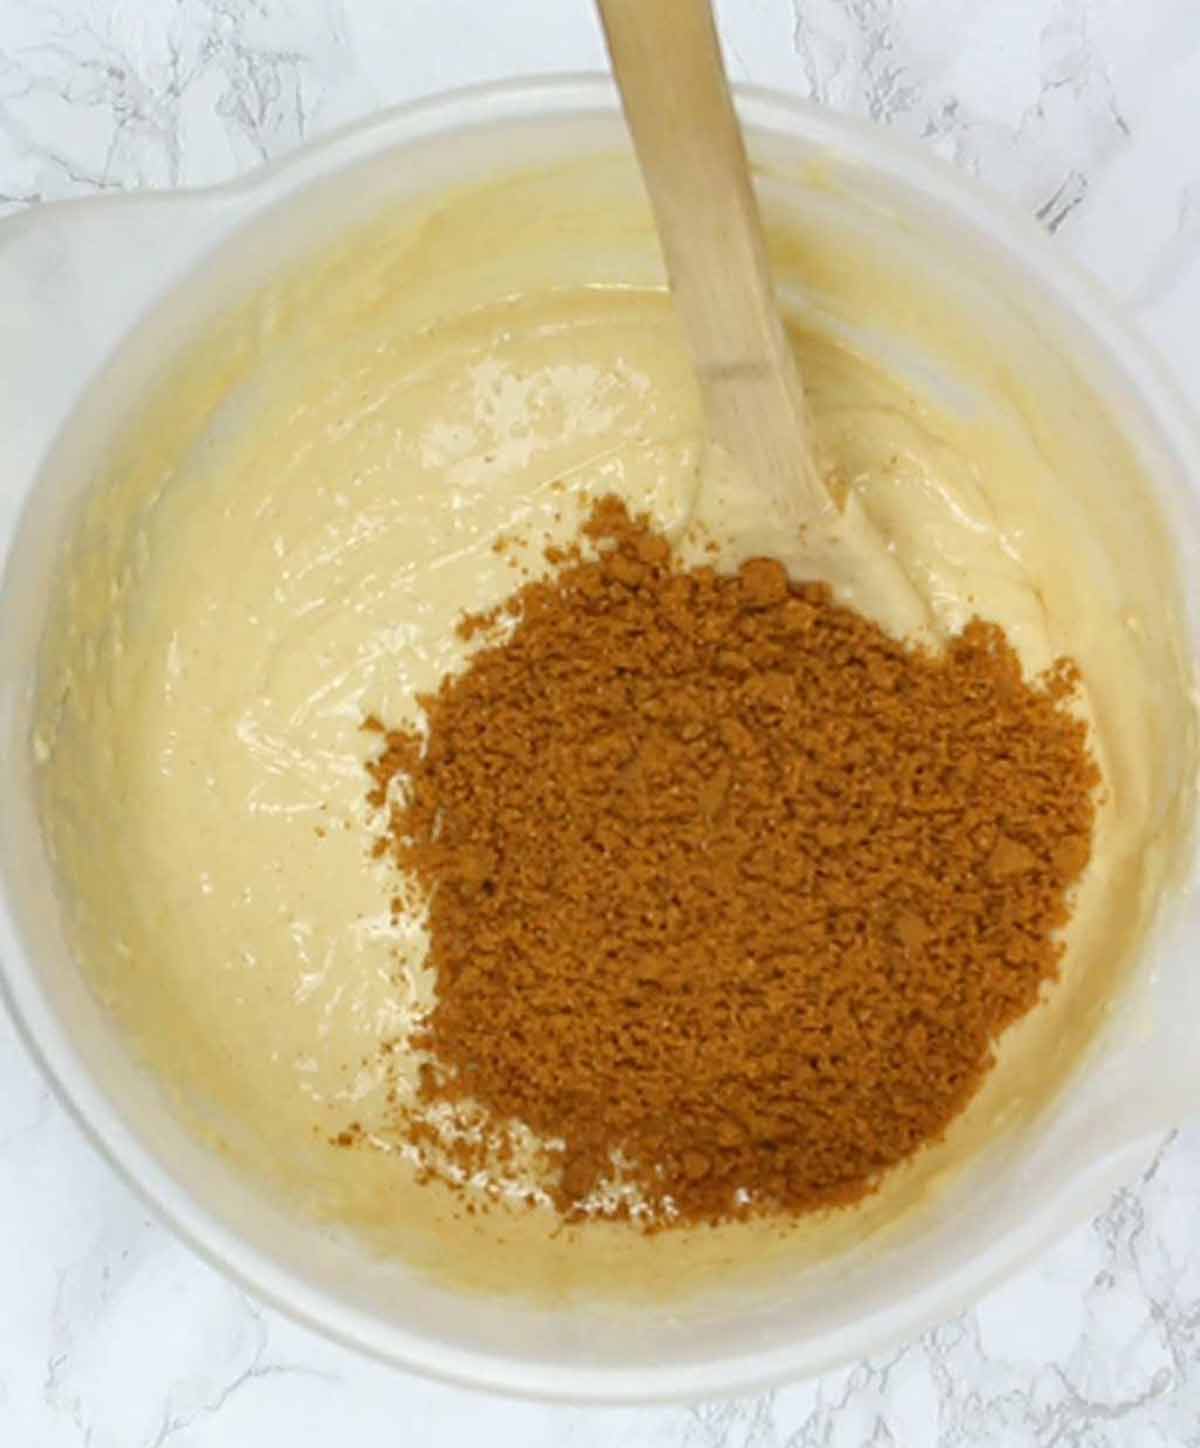 Cake Batter In Bowl With Biscuit Crumbs